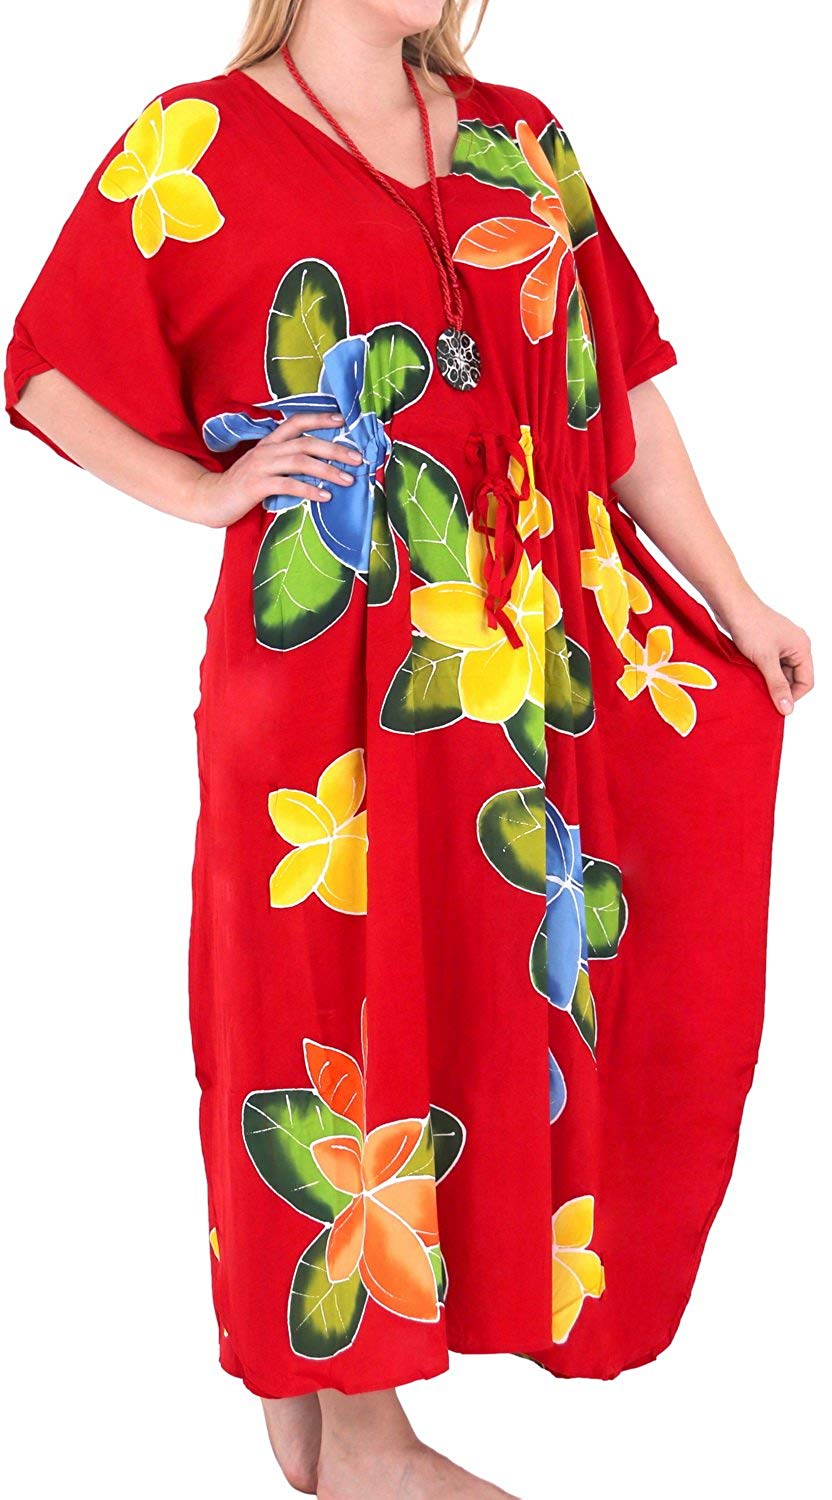 Women's Beachwear Sleeveless Rayon Cover up Dress Casual Caftans Multi  Red